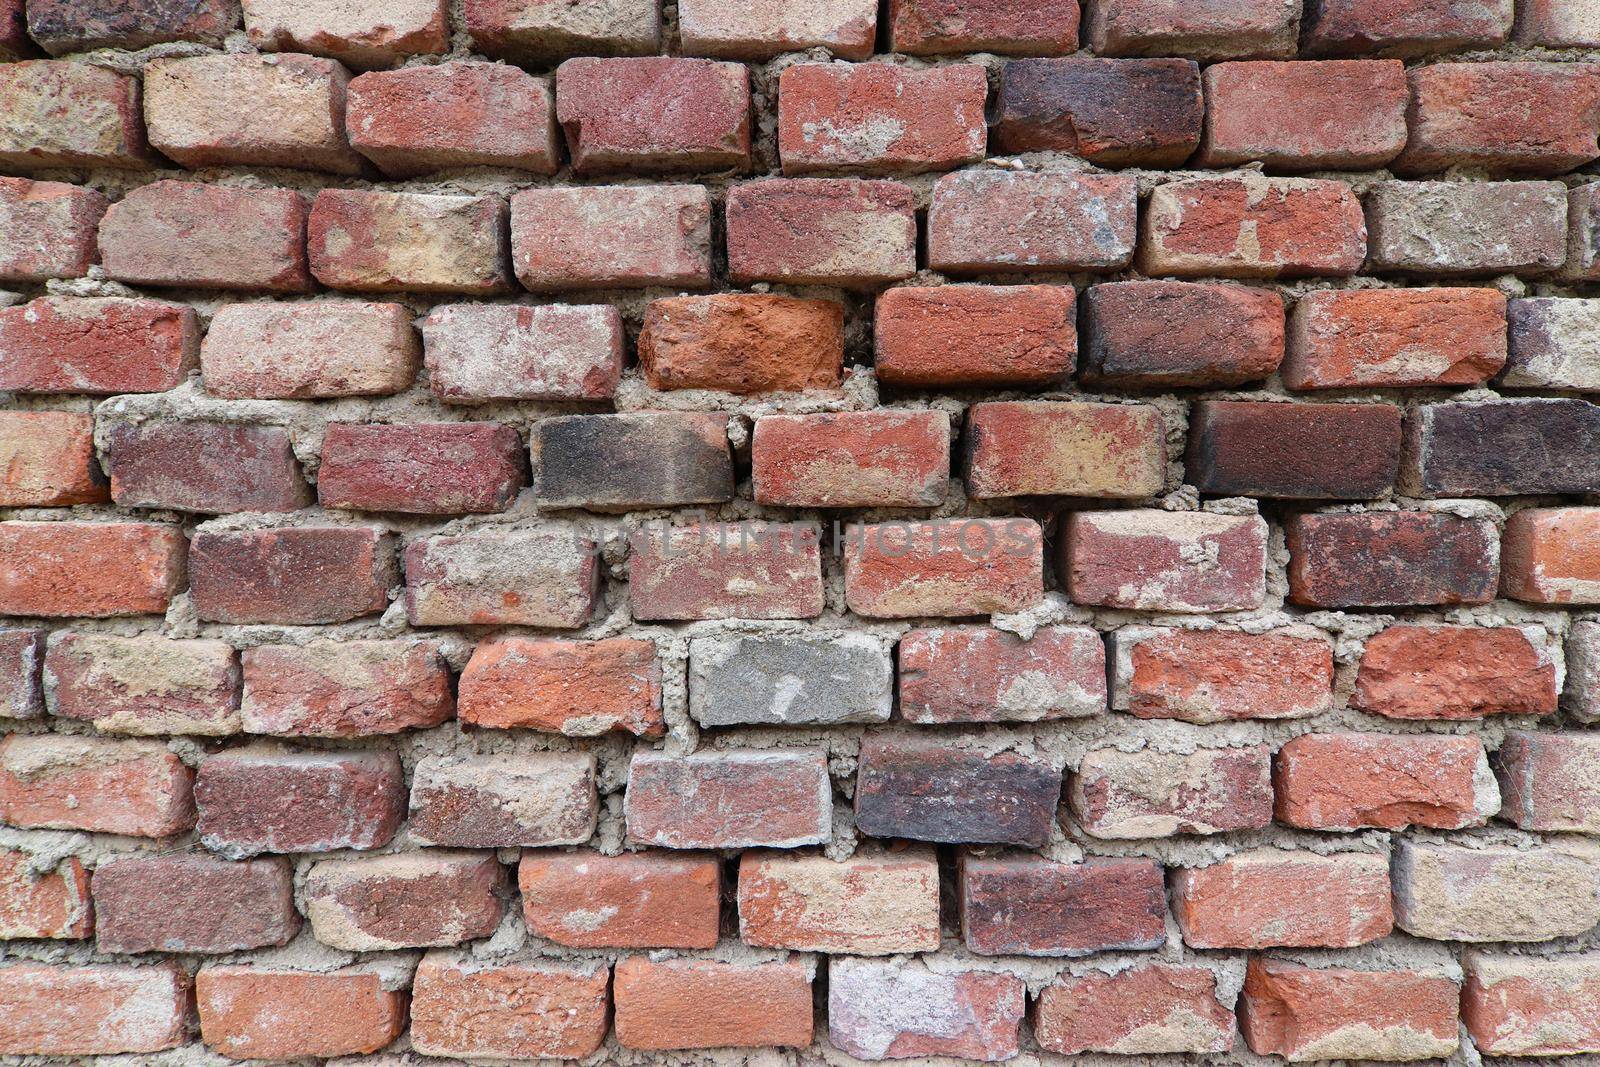 Detail of the old brick wall - brick pattern